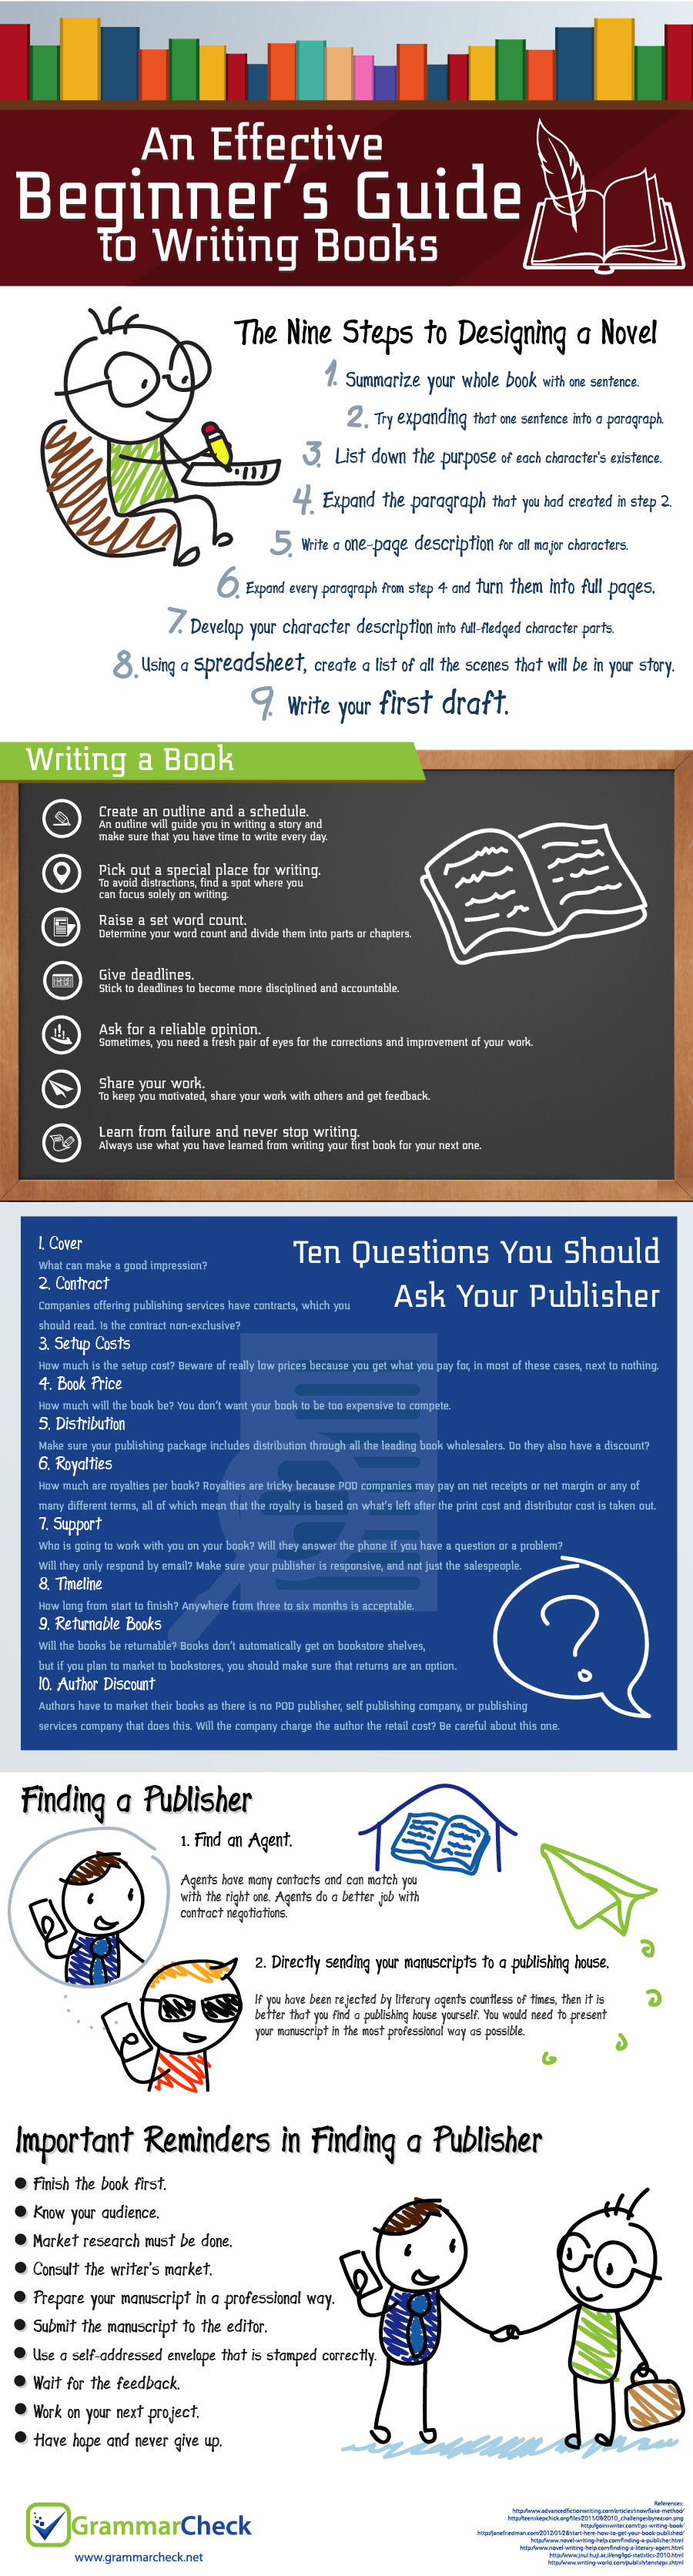 An Effective Beginner's Guide to Writing Books (Infographic)